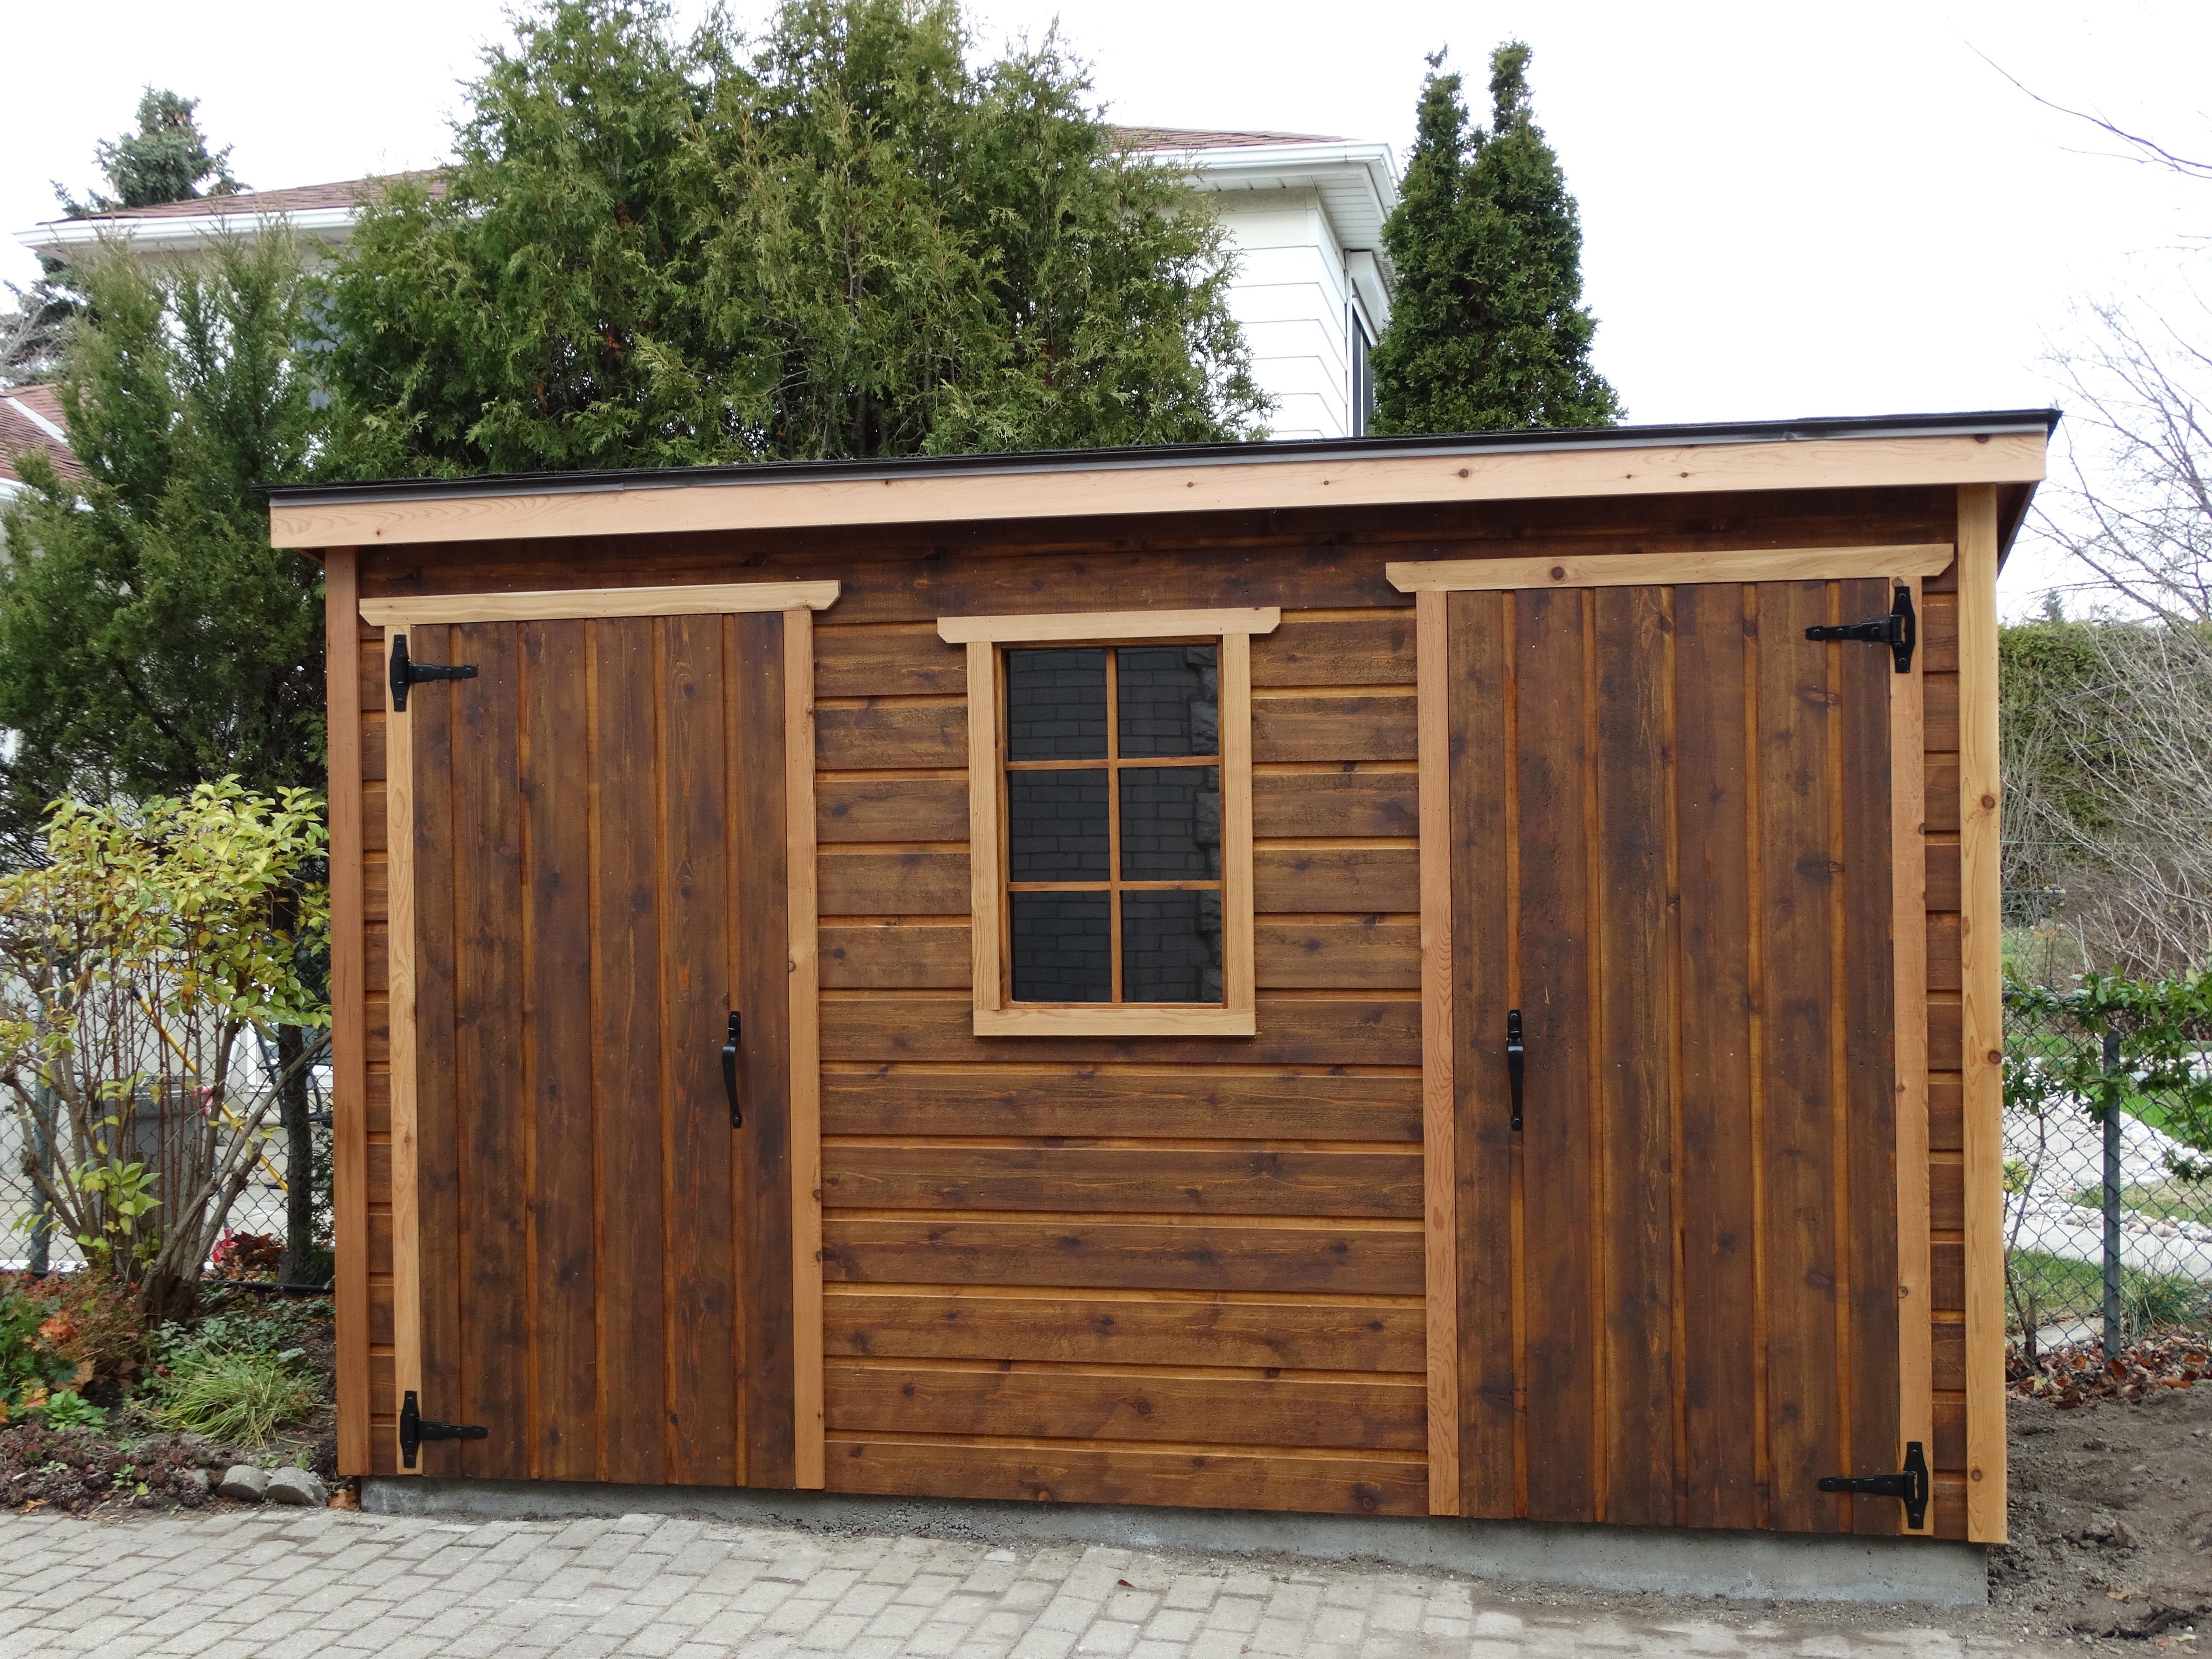 Cedar Sarawak lean to shed 5x12 with fixed window in Toronto, Ontario. ID number 195929-2